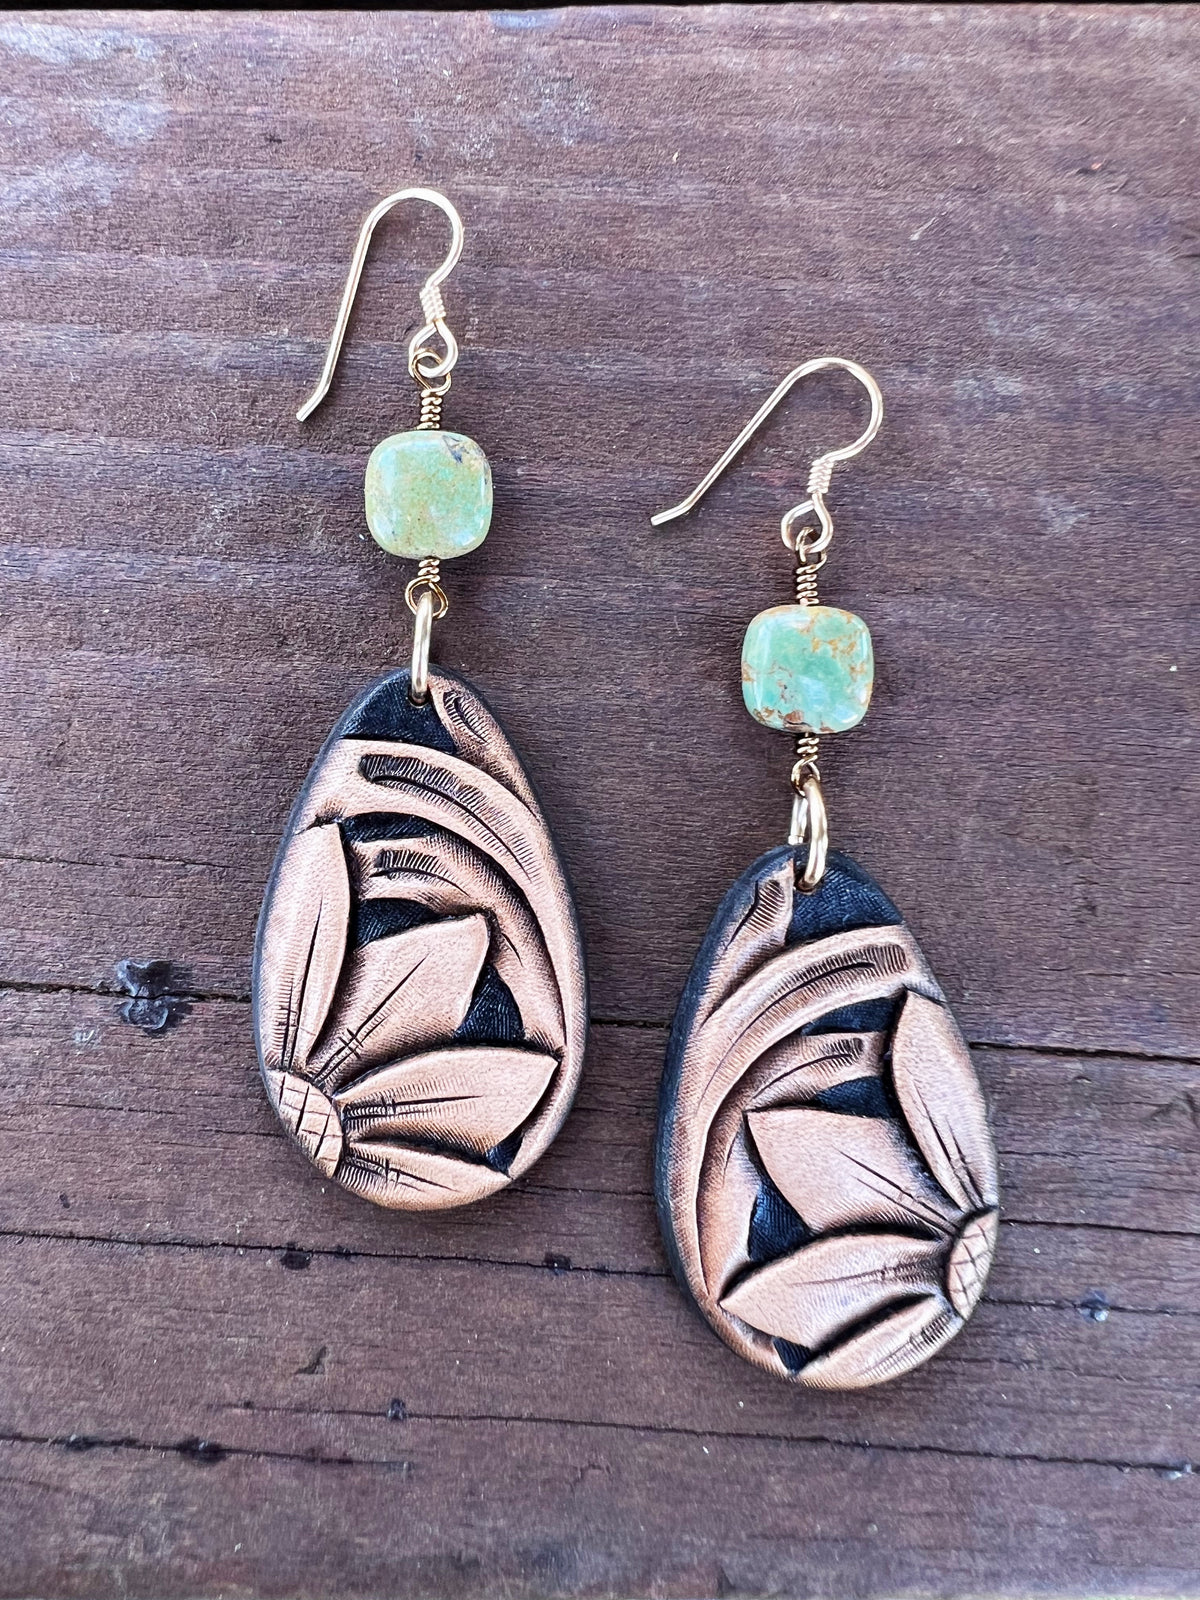 The Kingman Turquoise and Tooled Leather Earrings